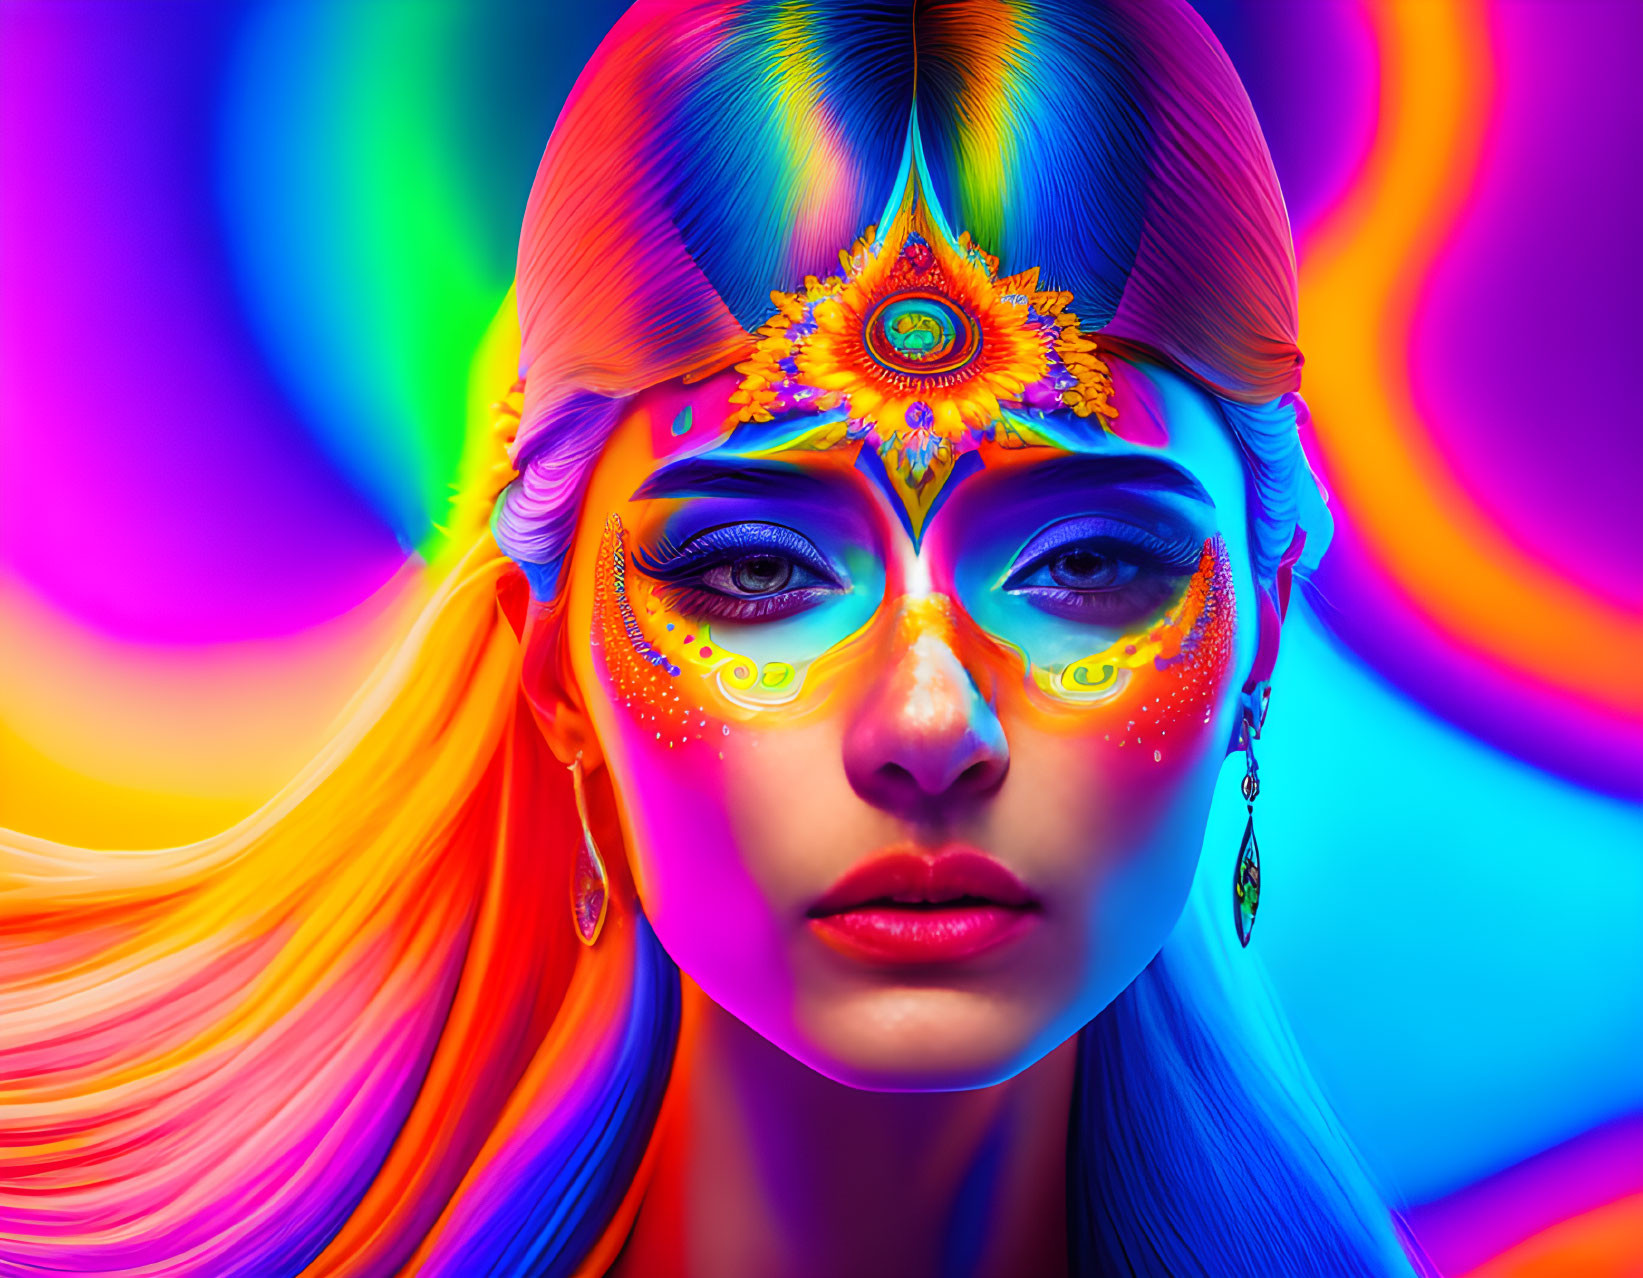 Colorful Digital Art: Woman with Fluorescent Makeup and Rainbow Hair